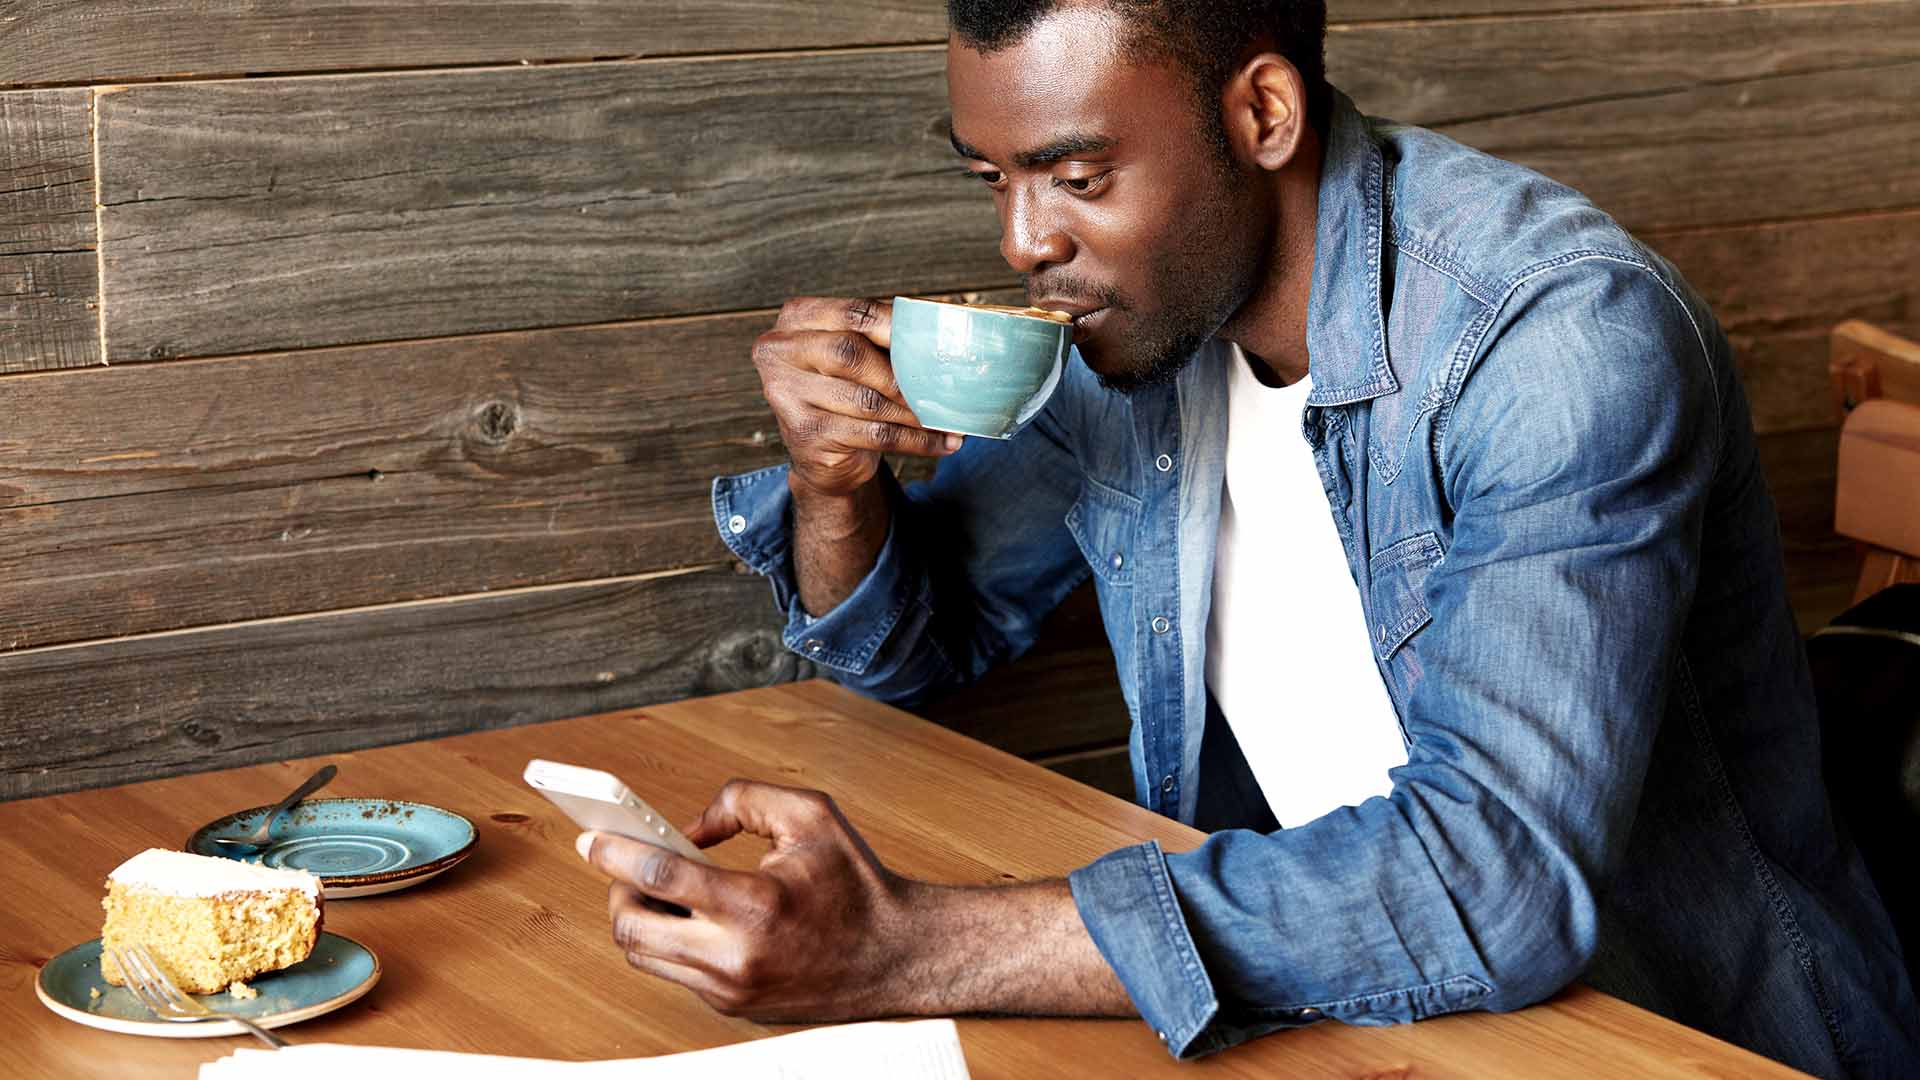 Man drinking coffee in a cafe looking at mobile phone